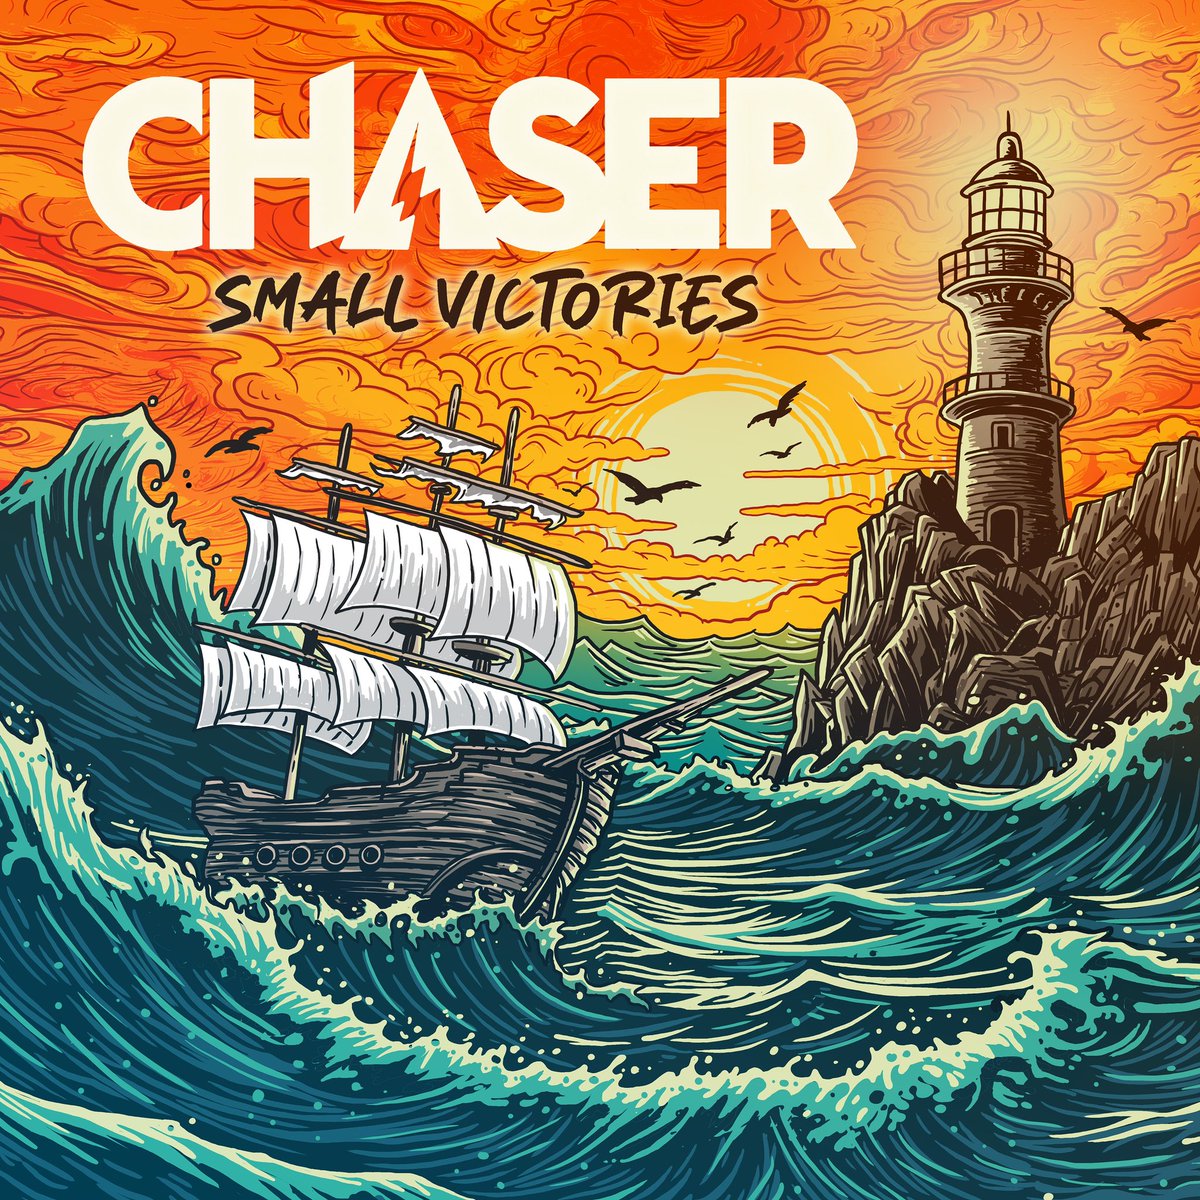 Mark your calendars…Brand new CHASER album “Small Victories” available June 28 through yours truly, SBÄM and PEE RECORDS! Featuring 13 new songs produced by Cameron Webb! 🔥